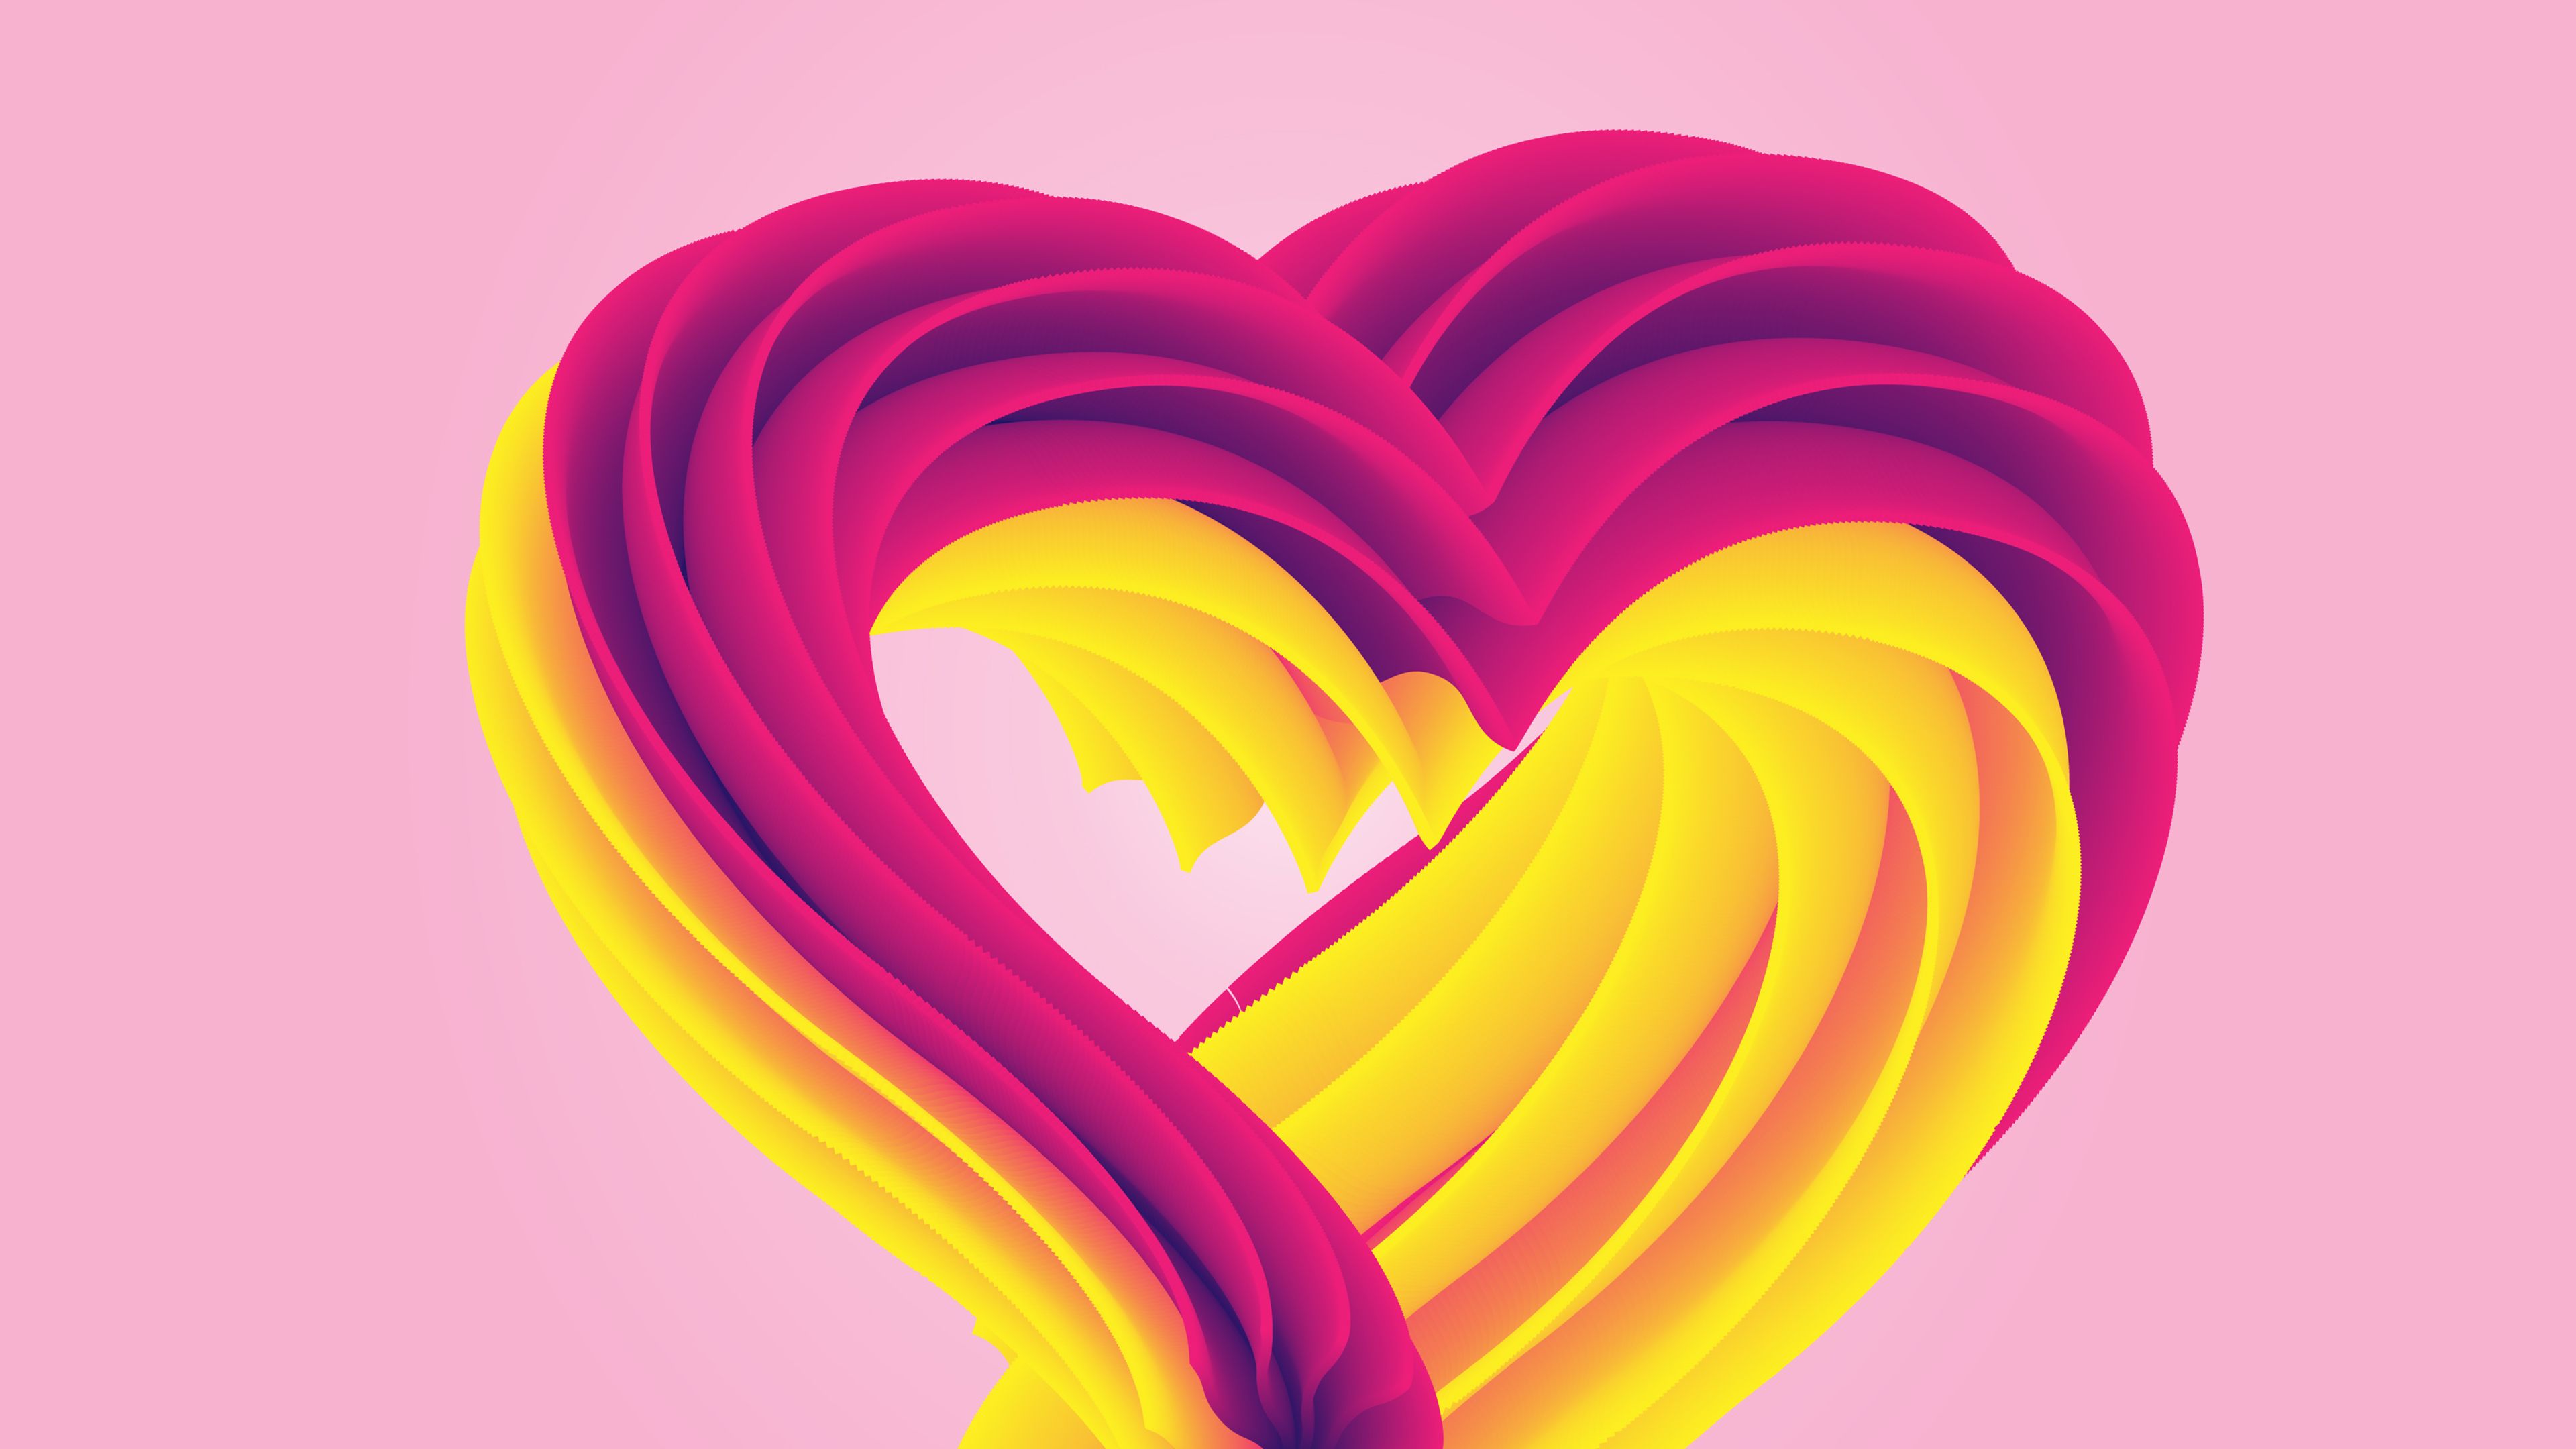 A pink and yellow heart made out of paper. - Heart, pink heart